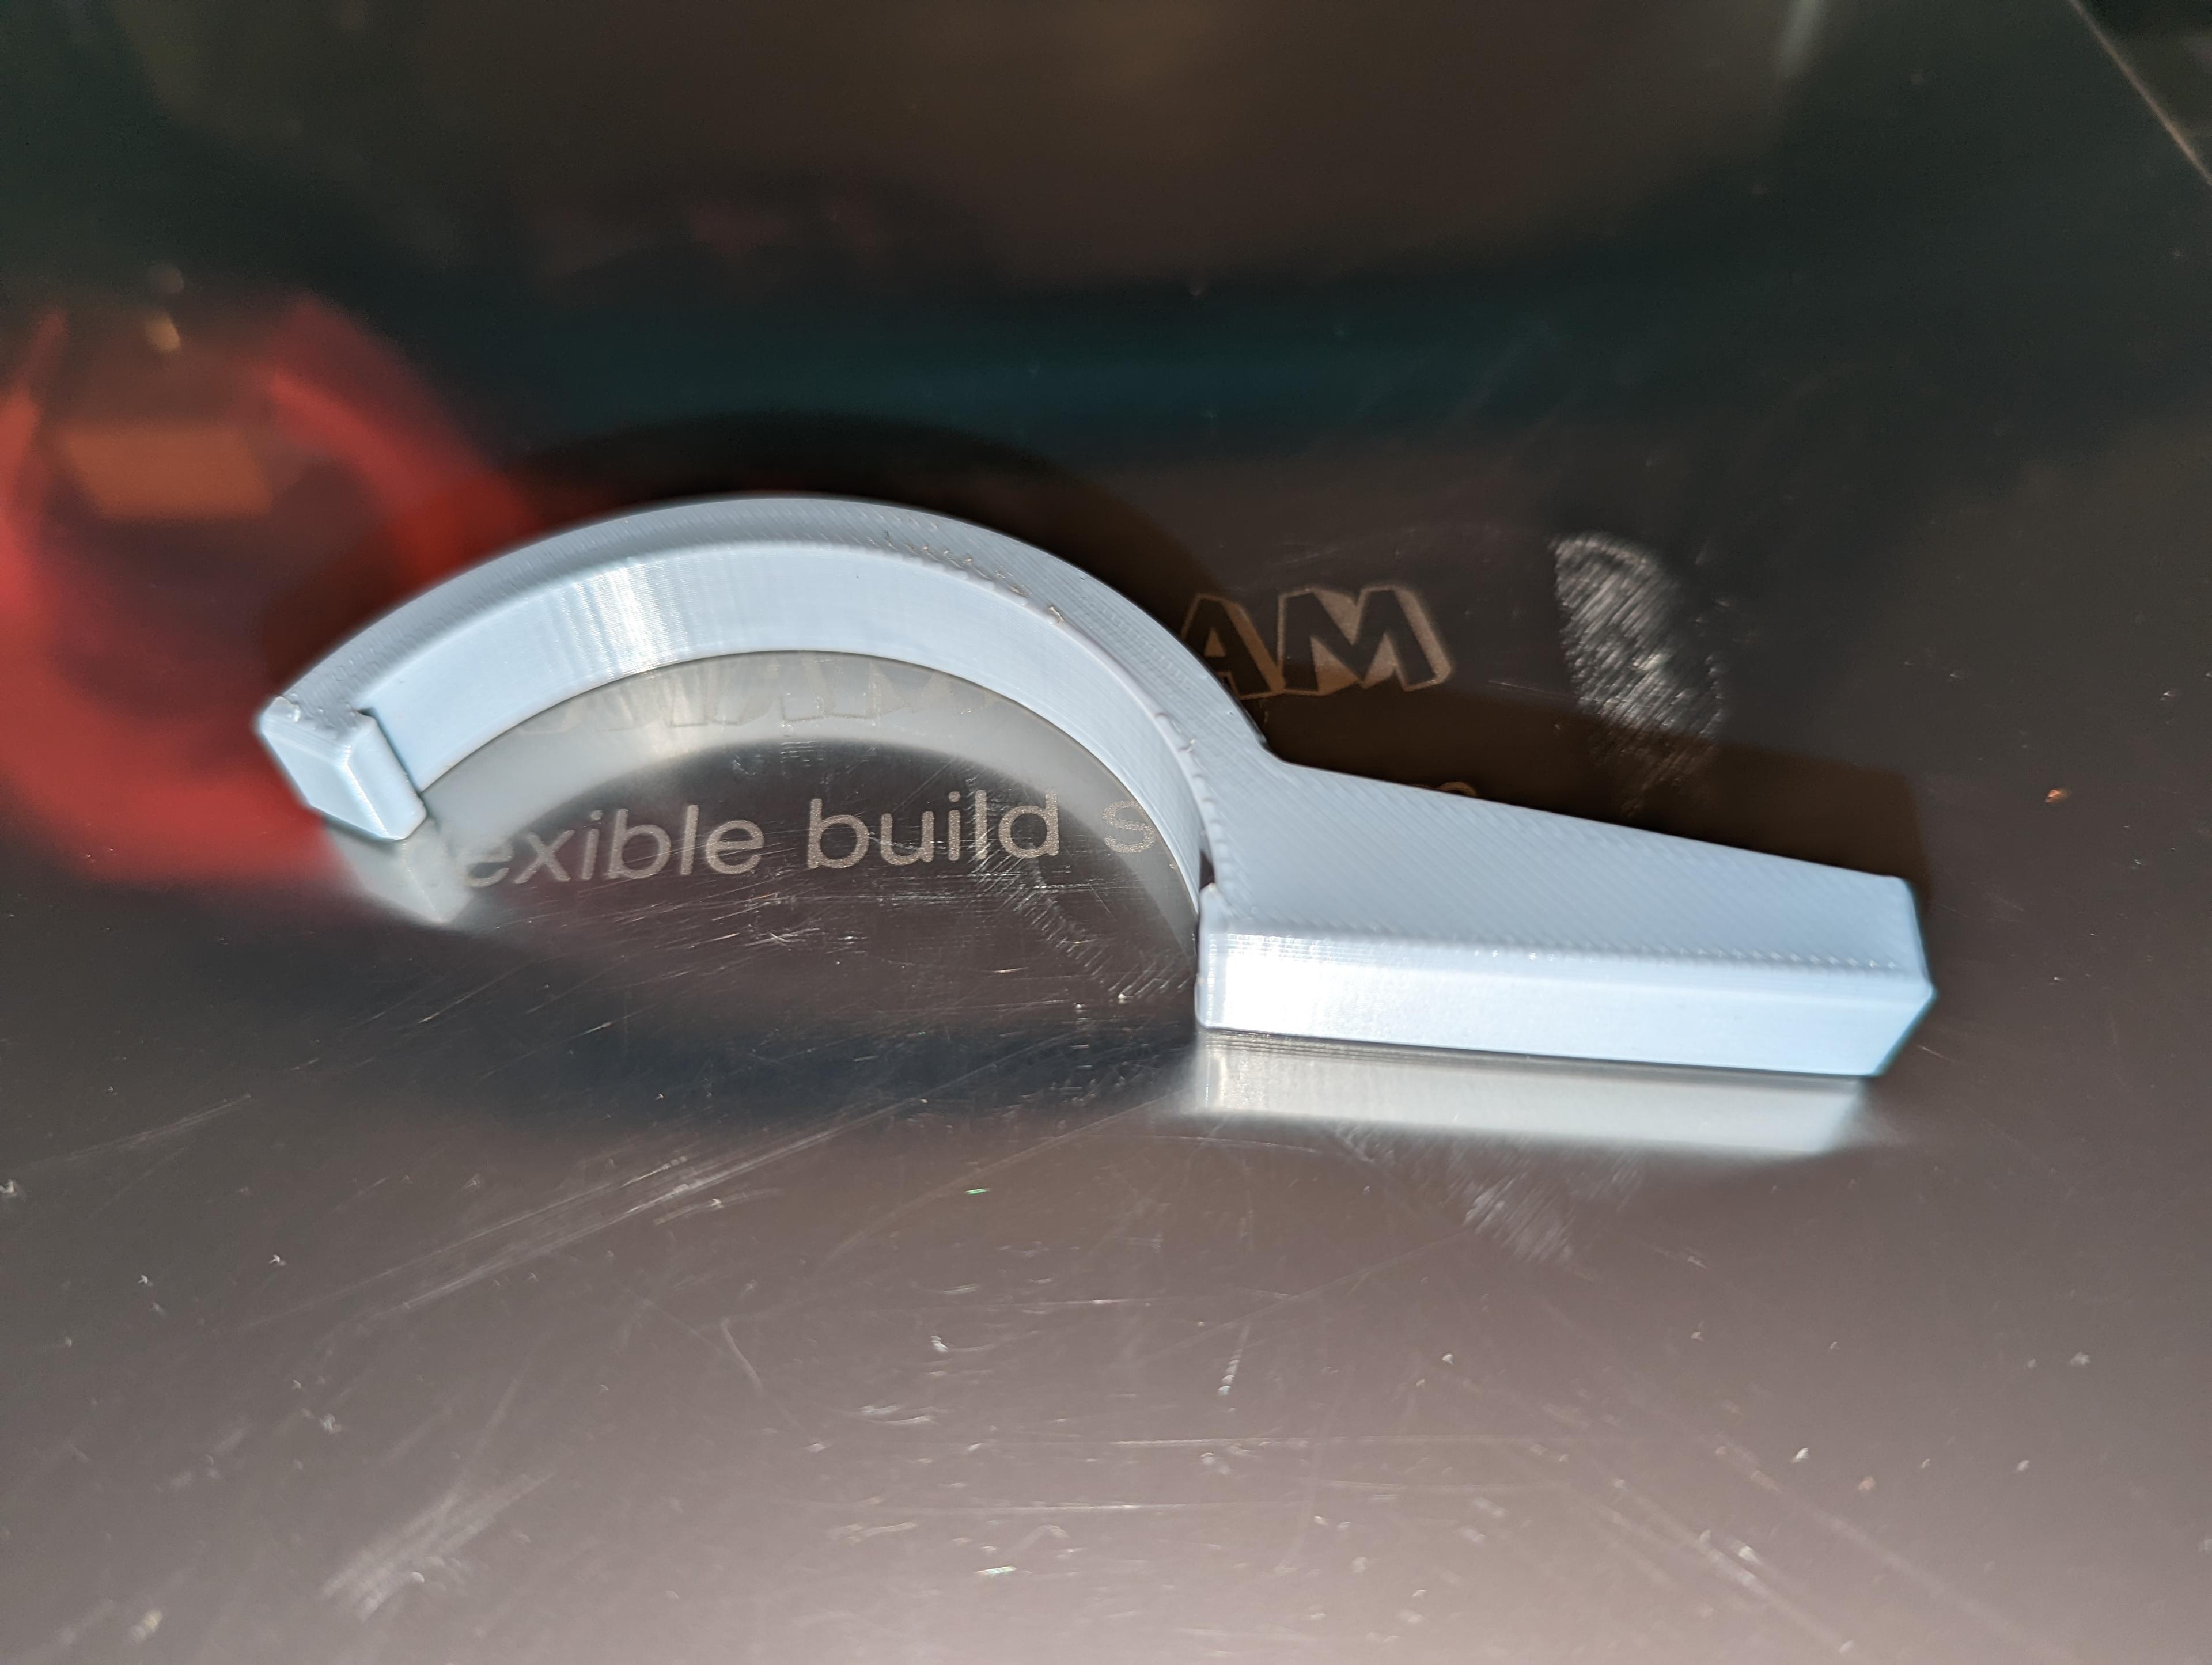 Sink Trap Spanner Wrench 3d model